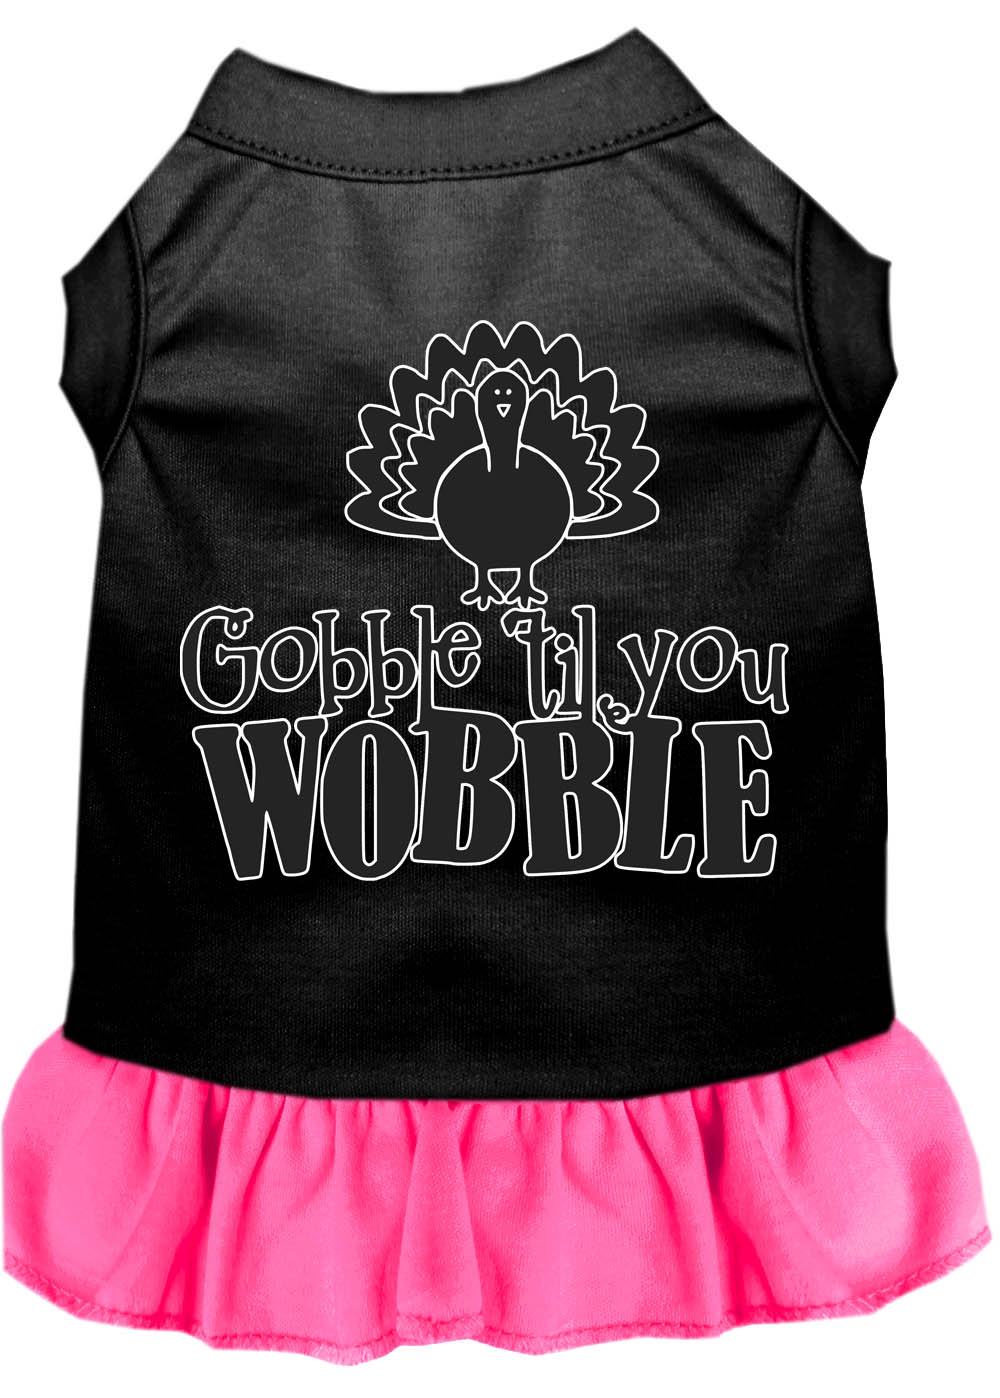 Gobble til You Wobble Screen Print Dog Dress Black with Bright Pink XL